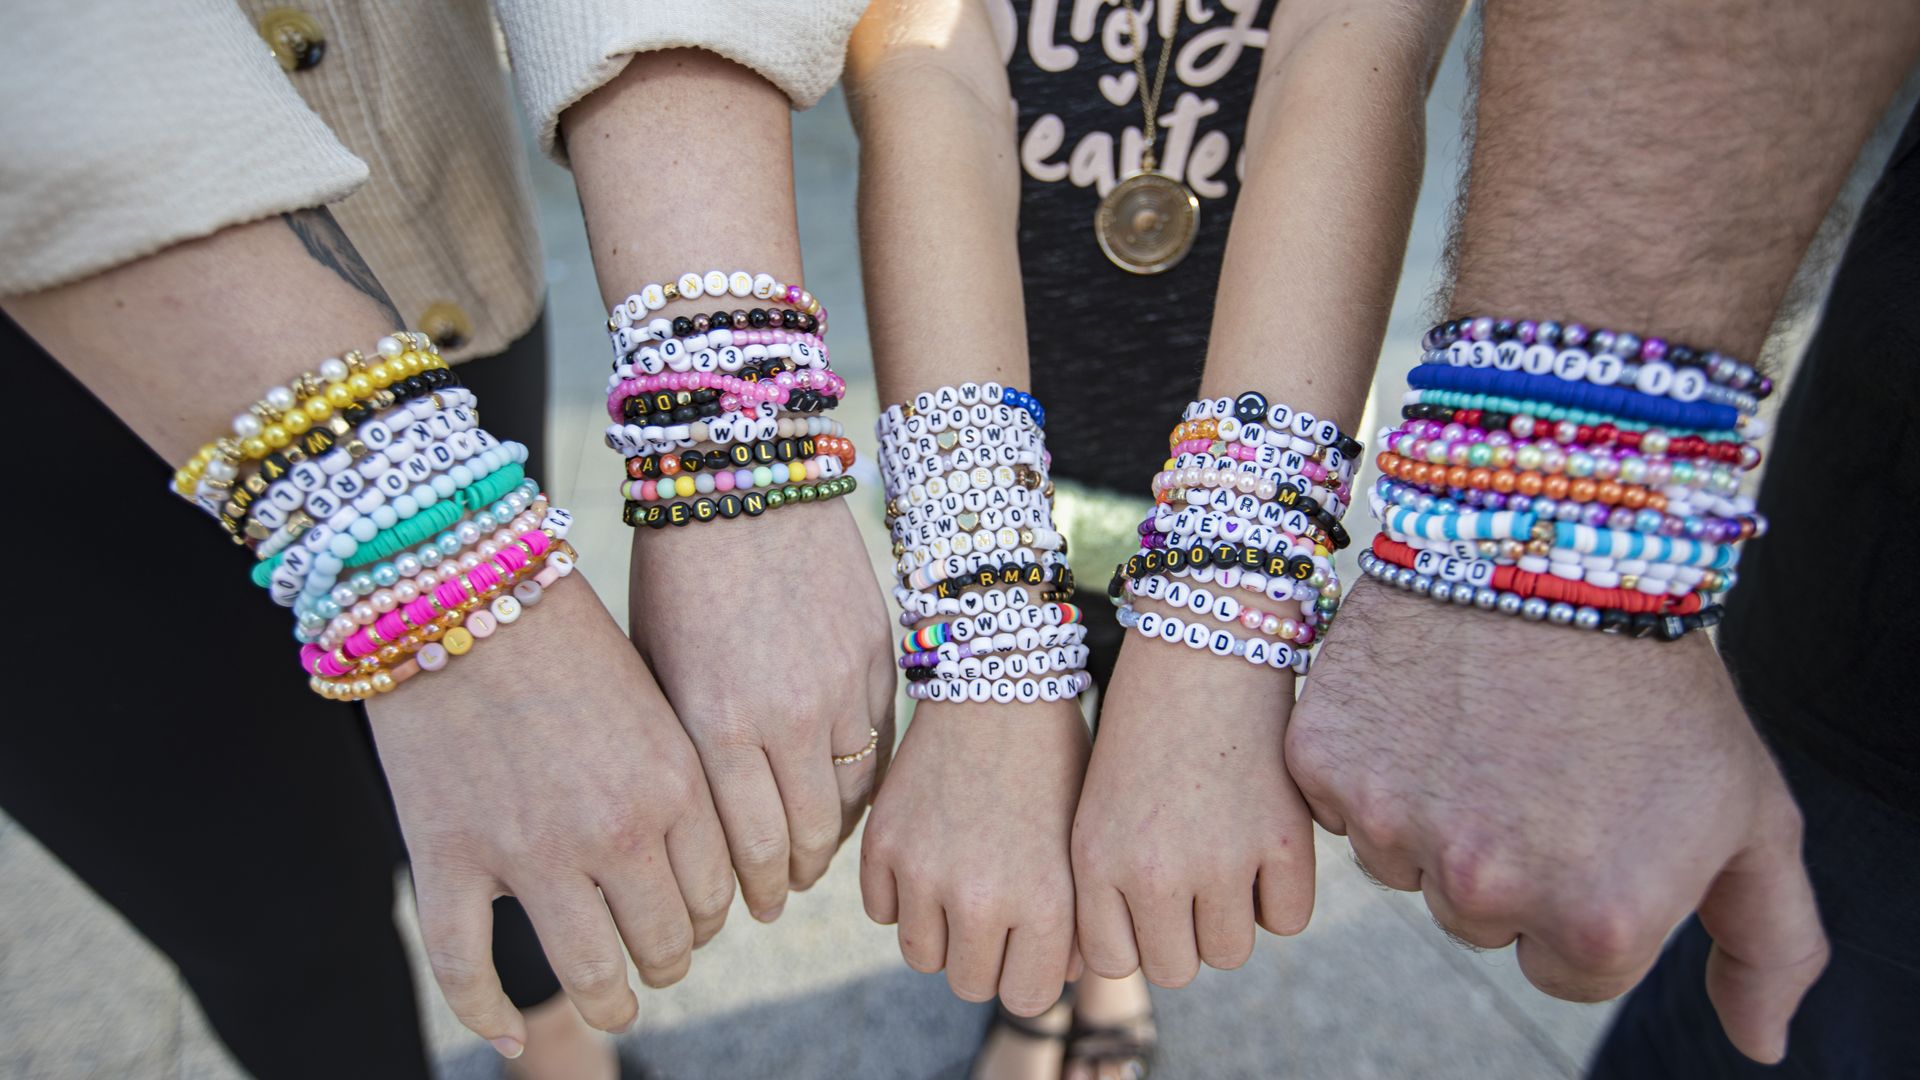 A photo of hands wearing friendship bracelets to a taylor swift concert